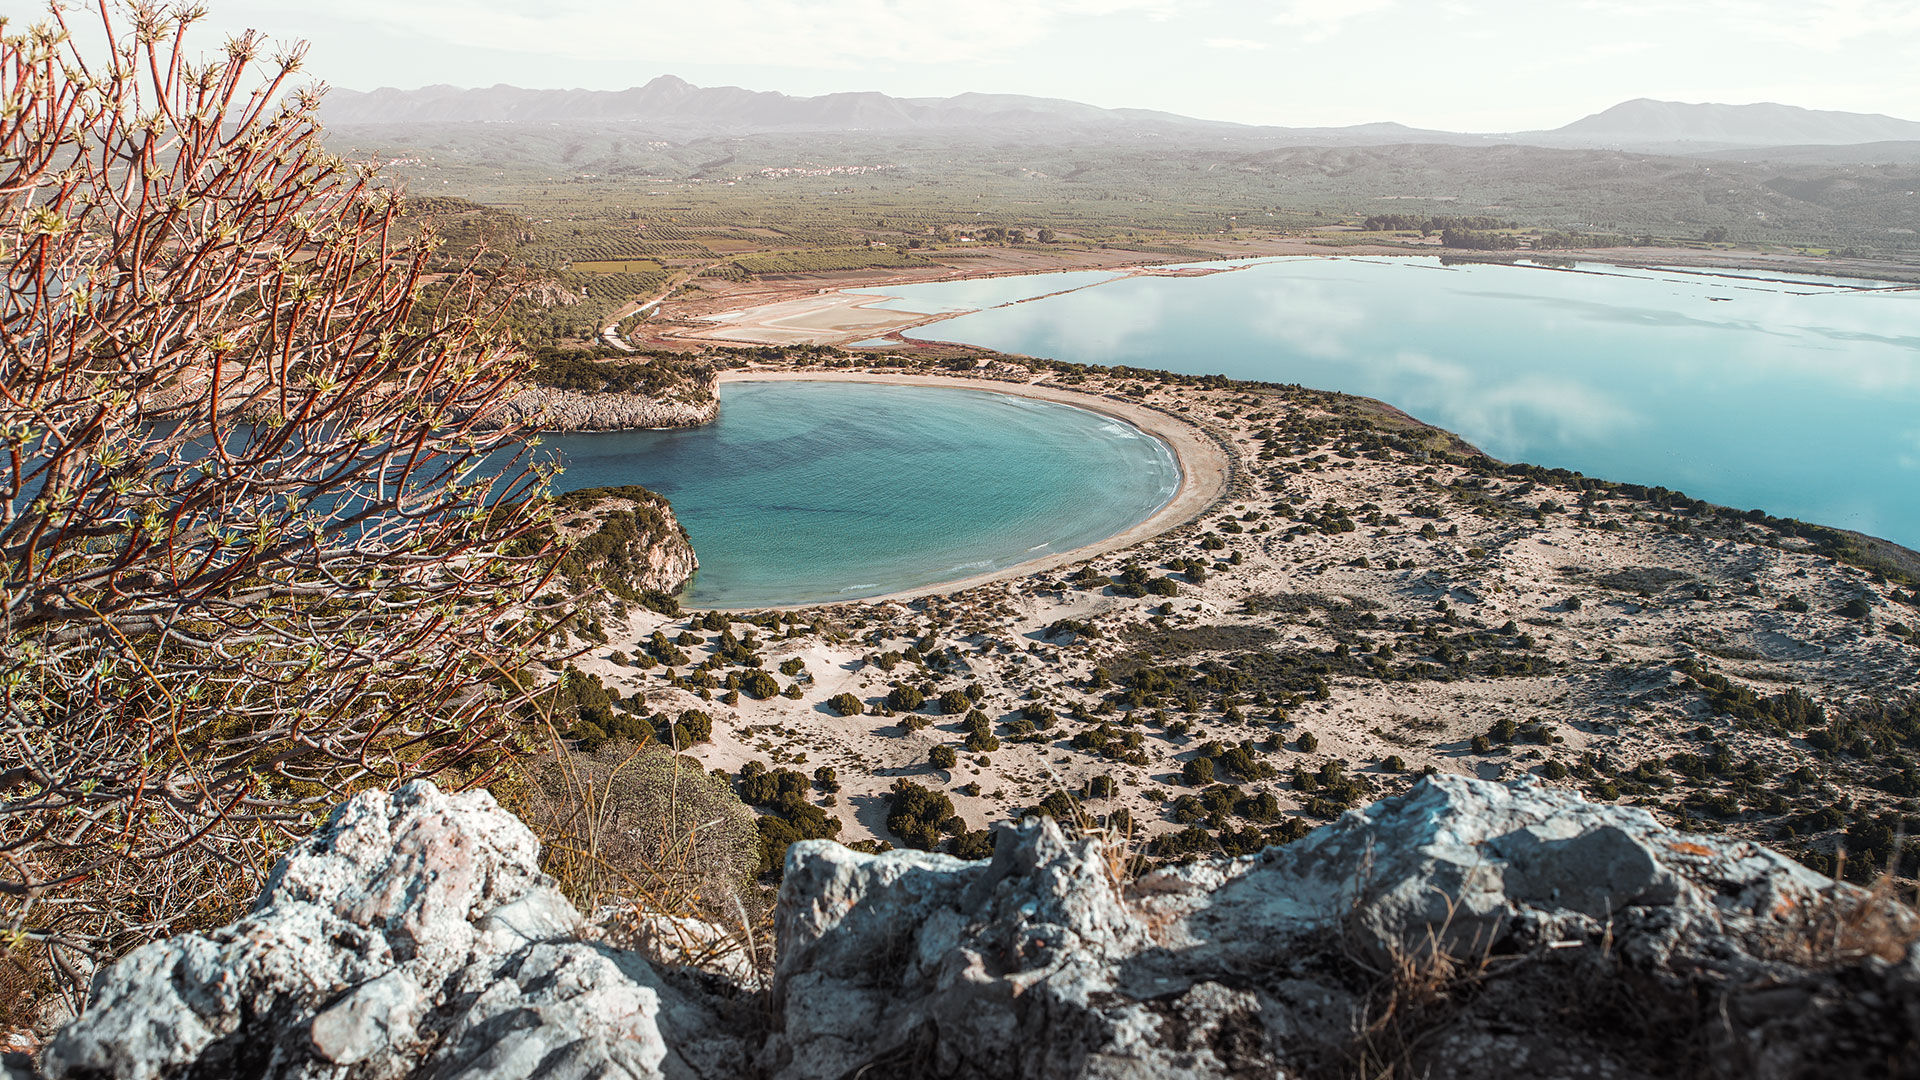 Voidokilia, the majesty of nature quite like the iconic horseshoe-shaped beach and its accompanying saltwater lagoon in Messinia